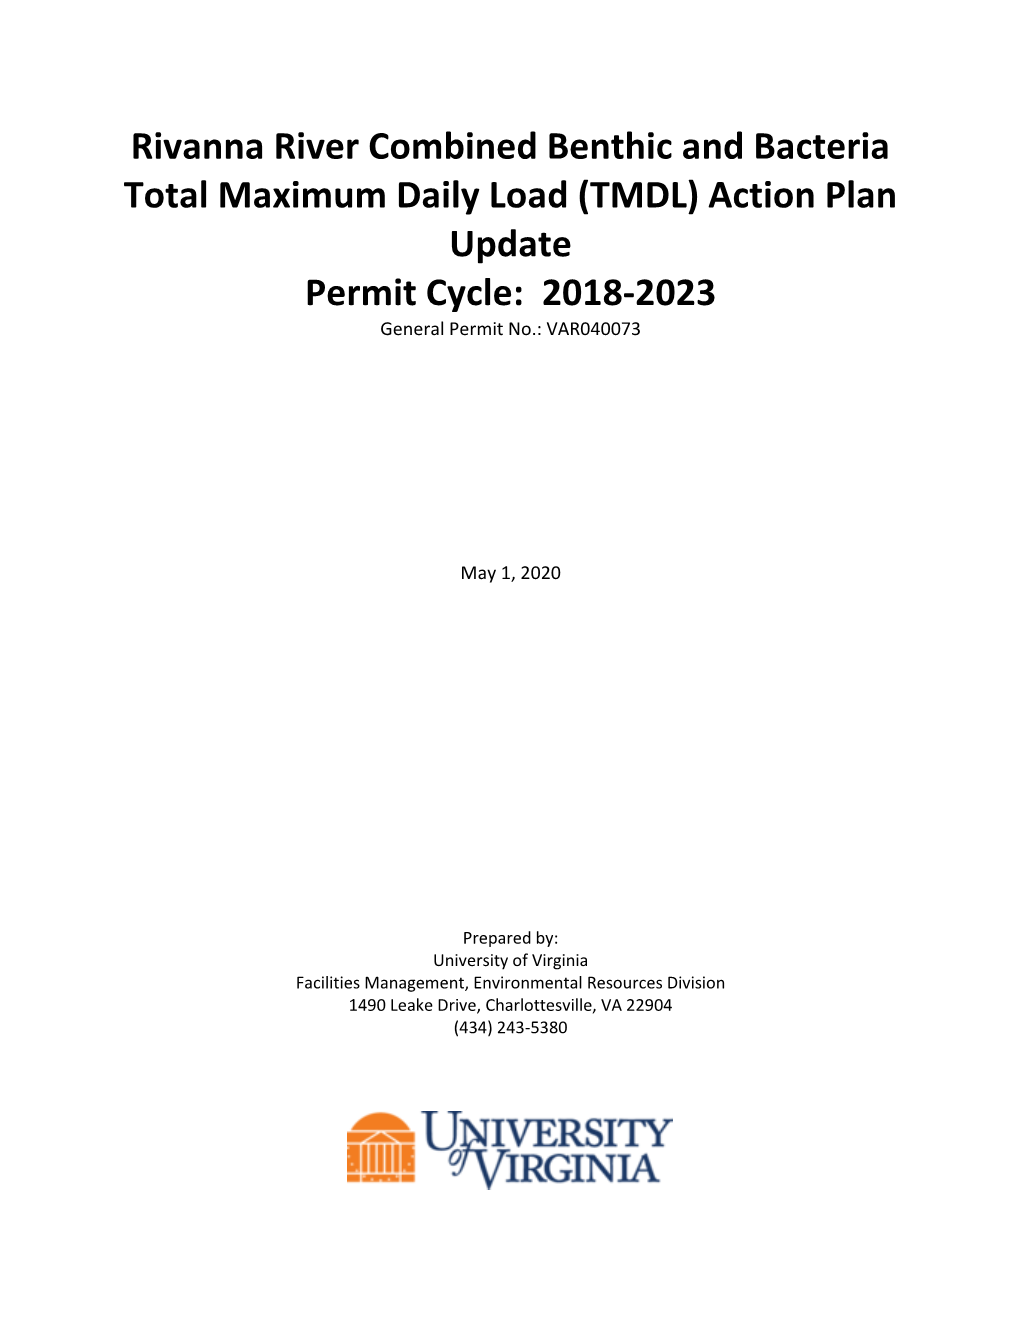 TMDL) Action Plan Update Permit Cycle: 2018-2023 General Permit No.: VAR040073